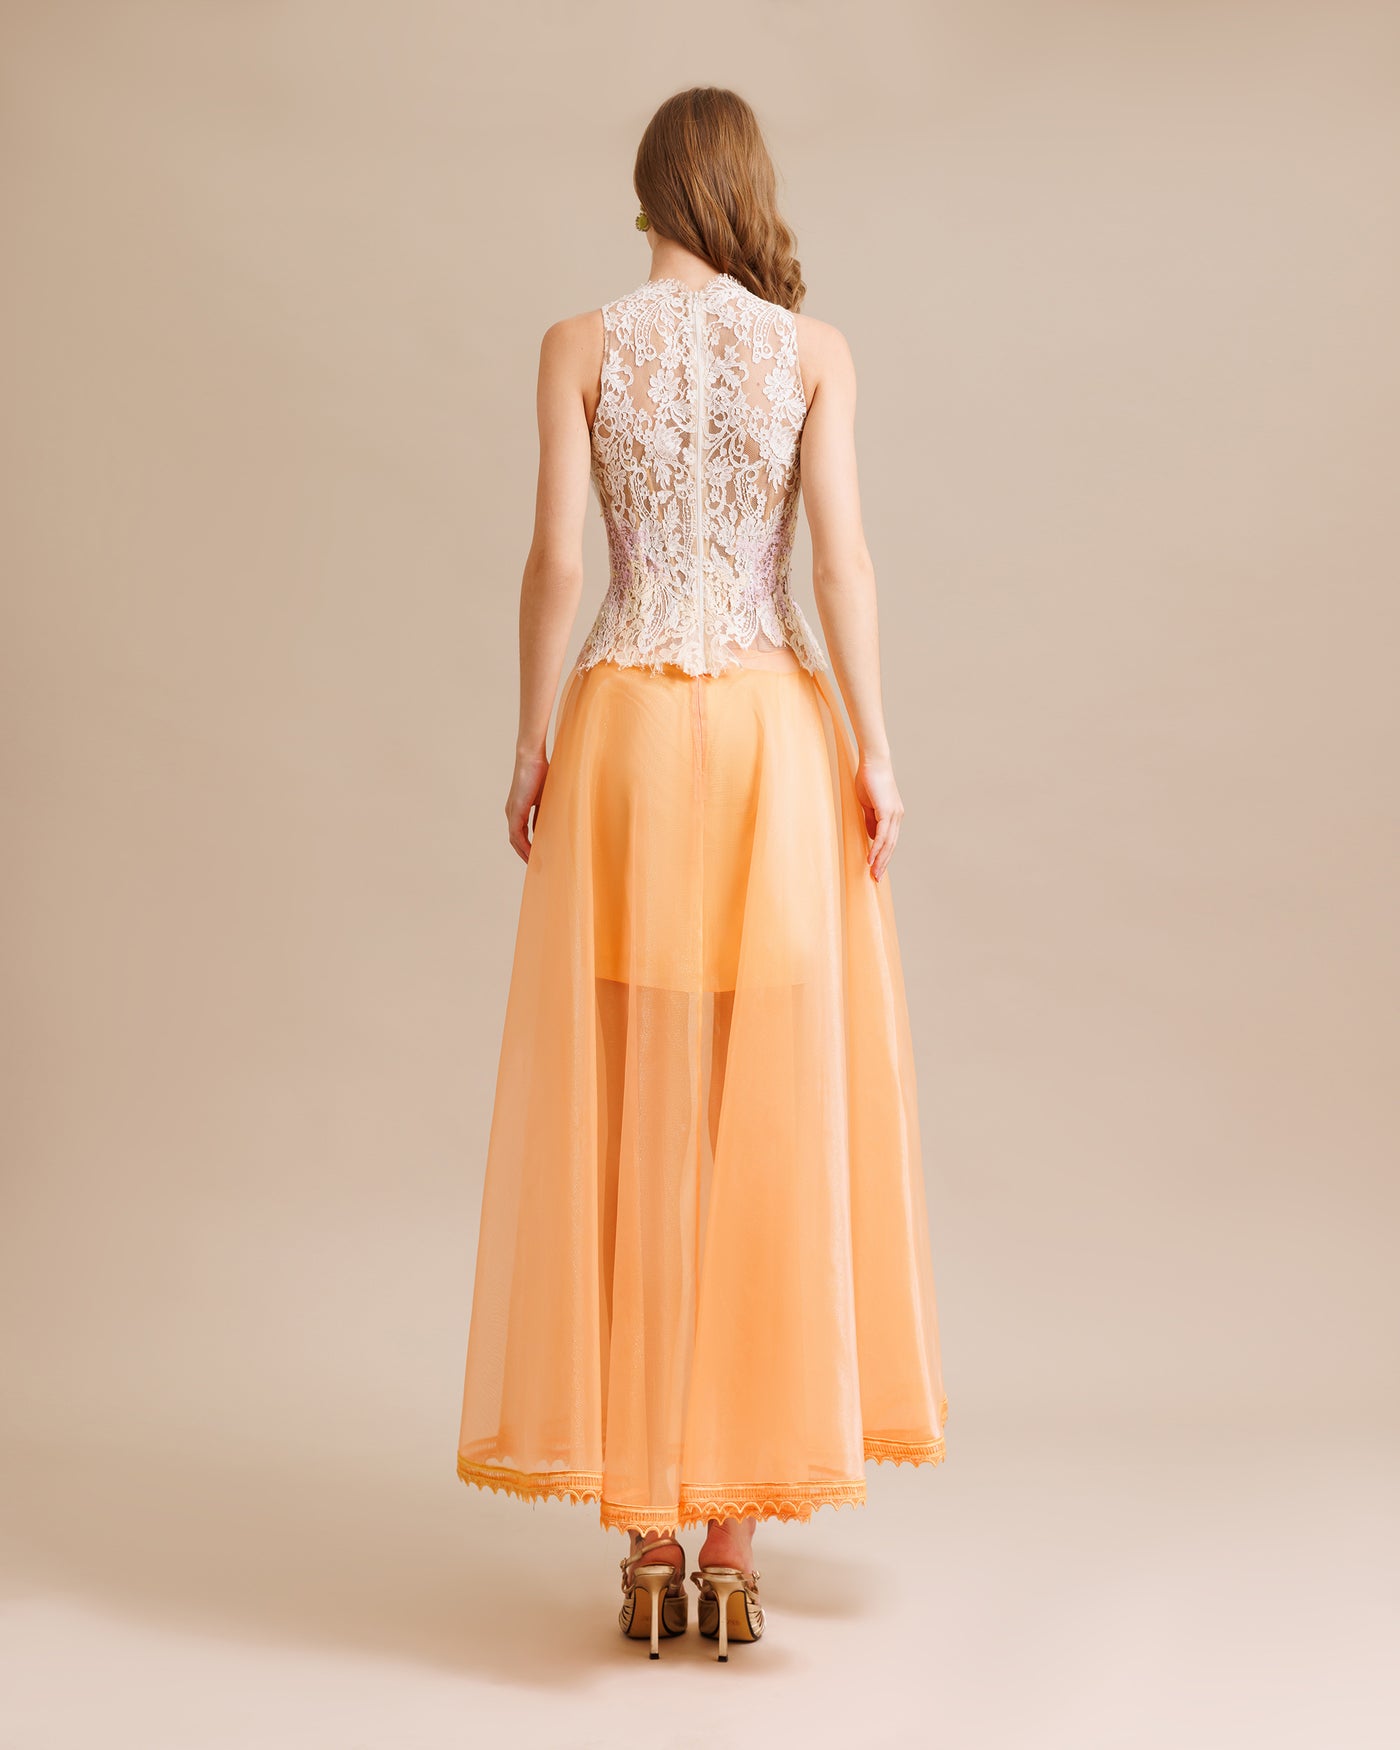 A Voluminous Skirt With A Halterneck Lace Top